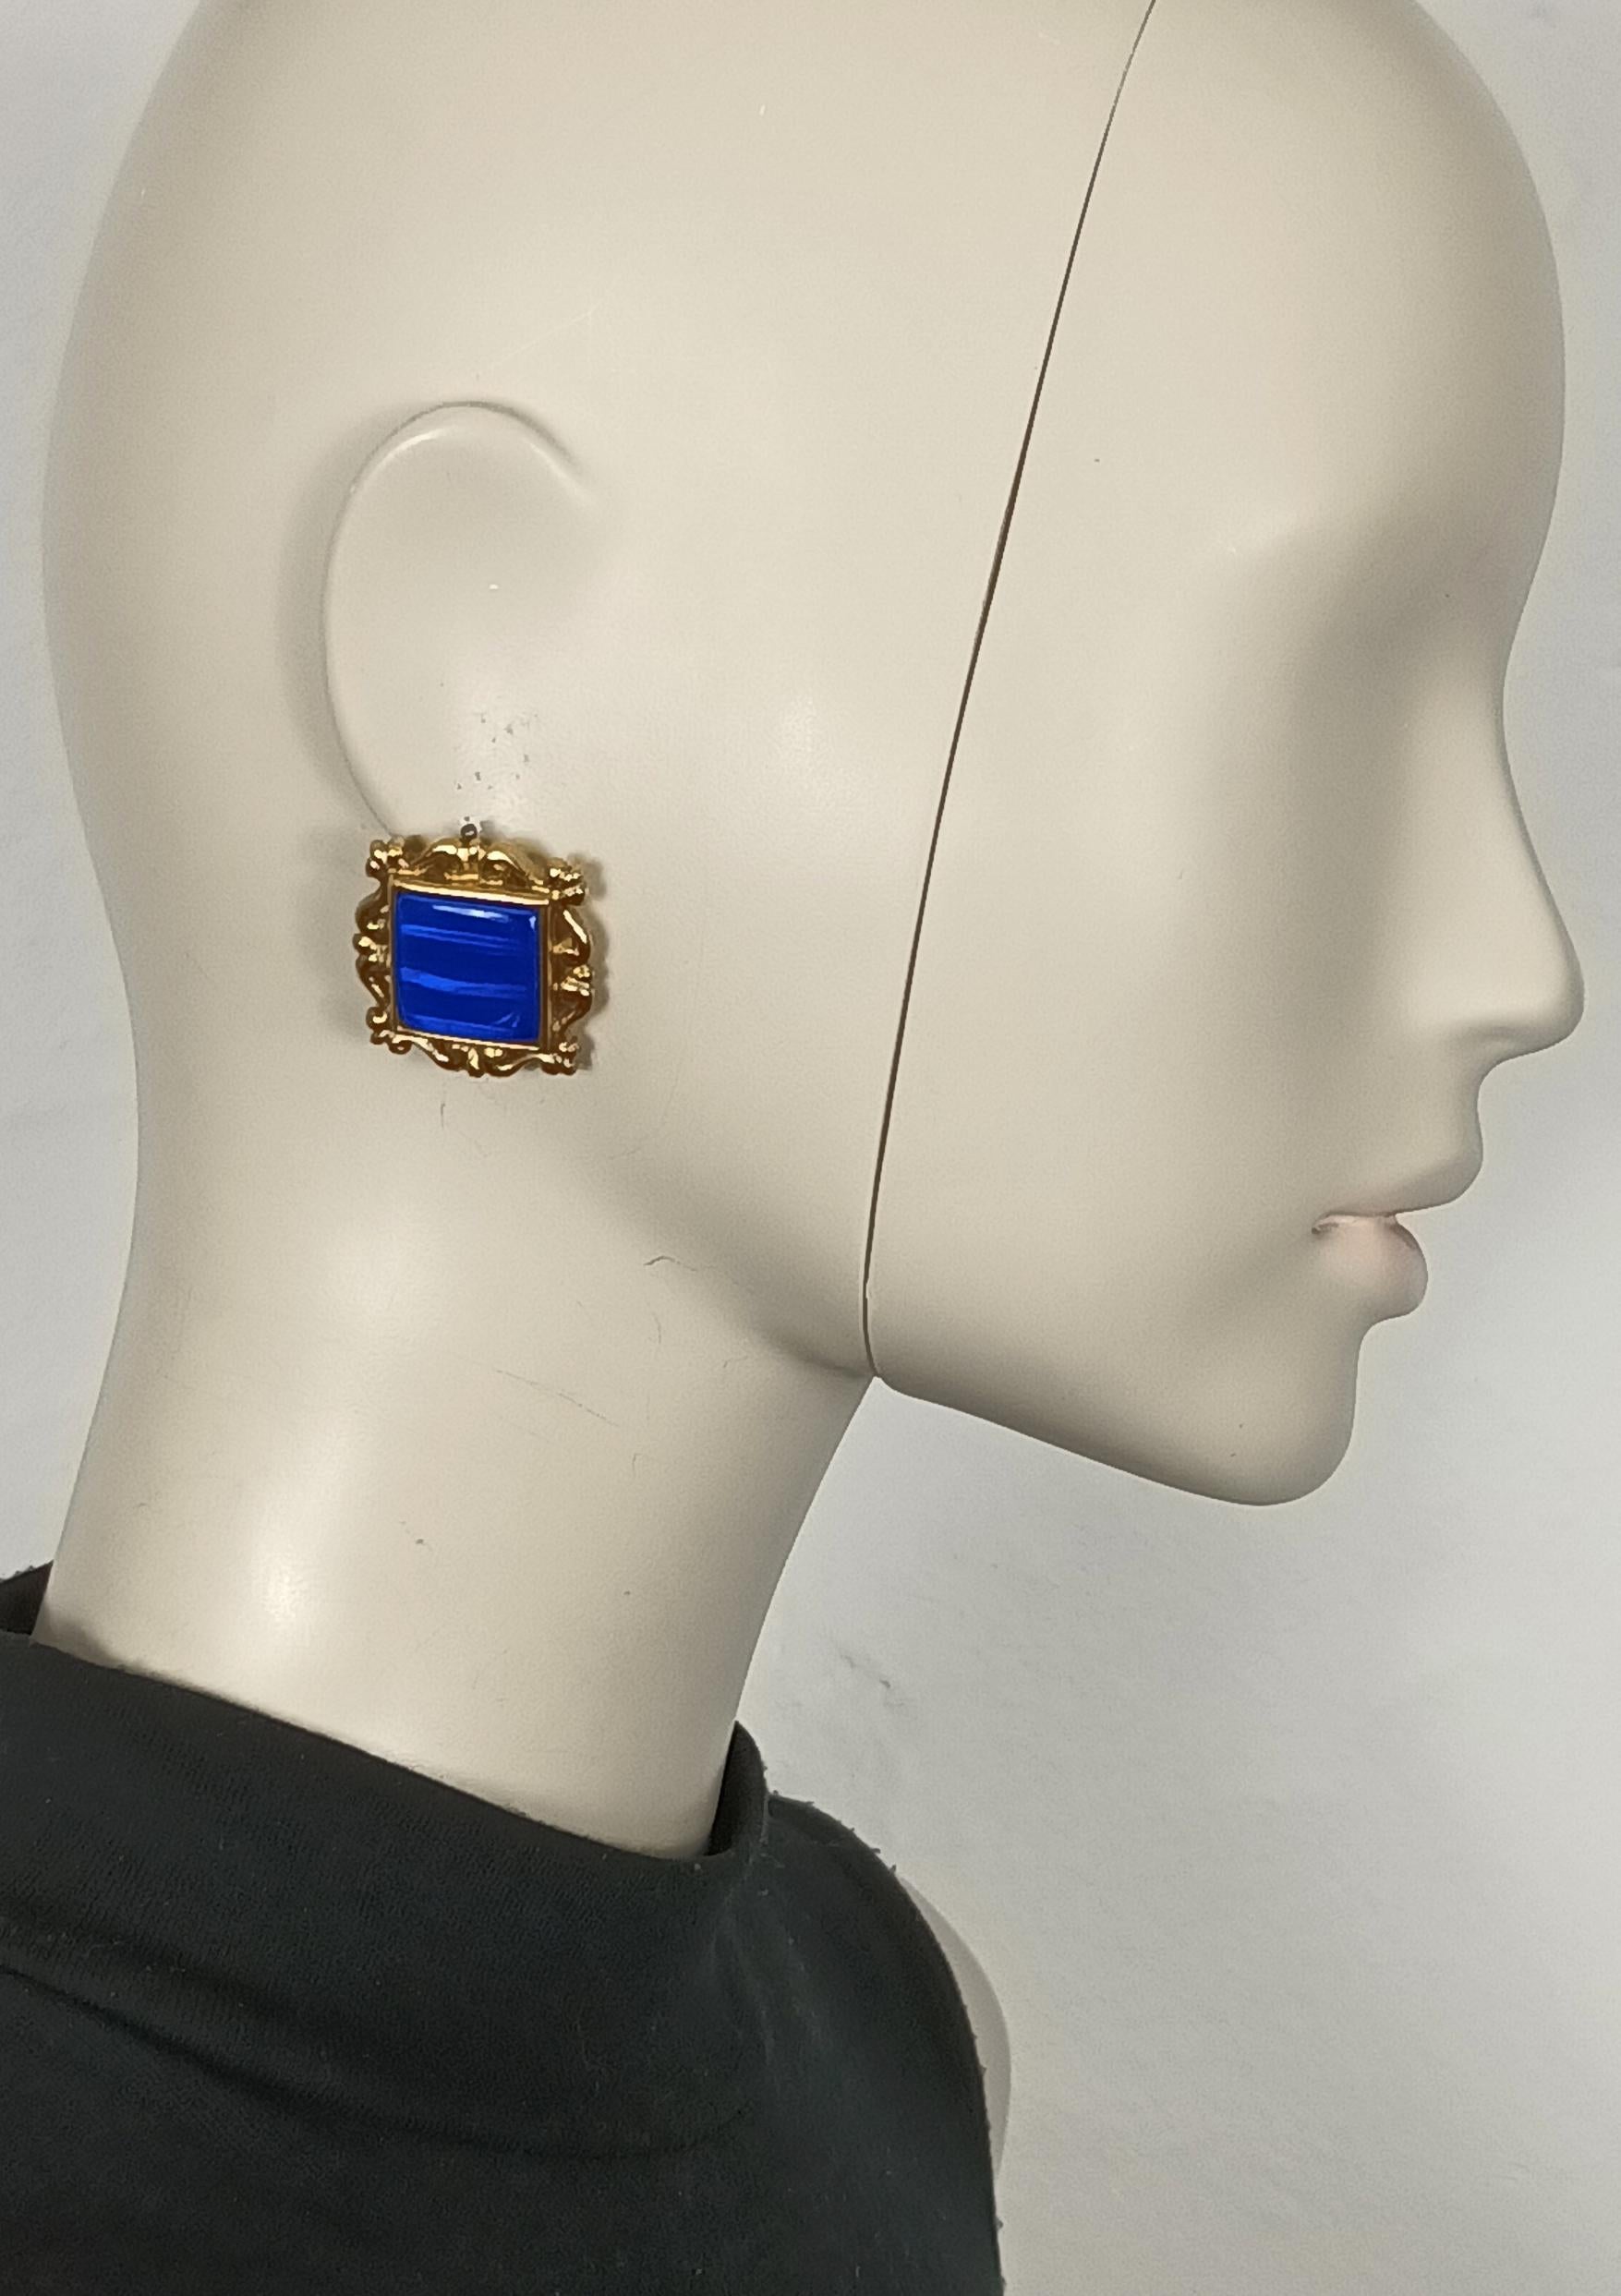 YVES SAINT LAURENT vintage gold tone clip-on earrings featuring a square blue iridescent resin cabochon at the center.

Embossed YSL Made in France.

Indicative measurements : max. 2.9 cm x max. 2.9 cm (1.14 inches x 1.14 inches).

Weight per